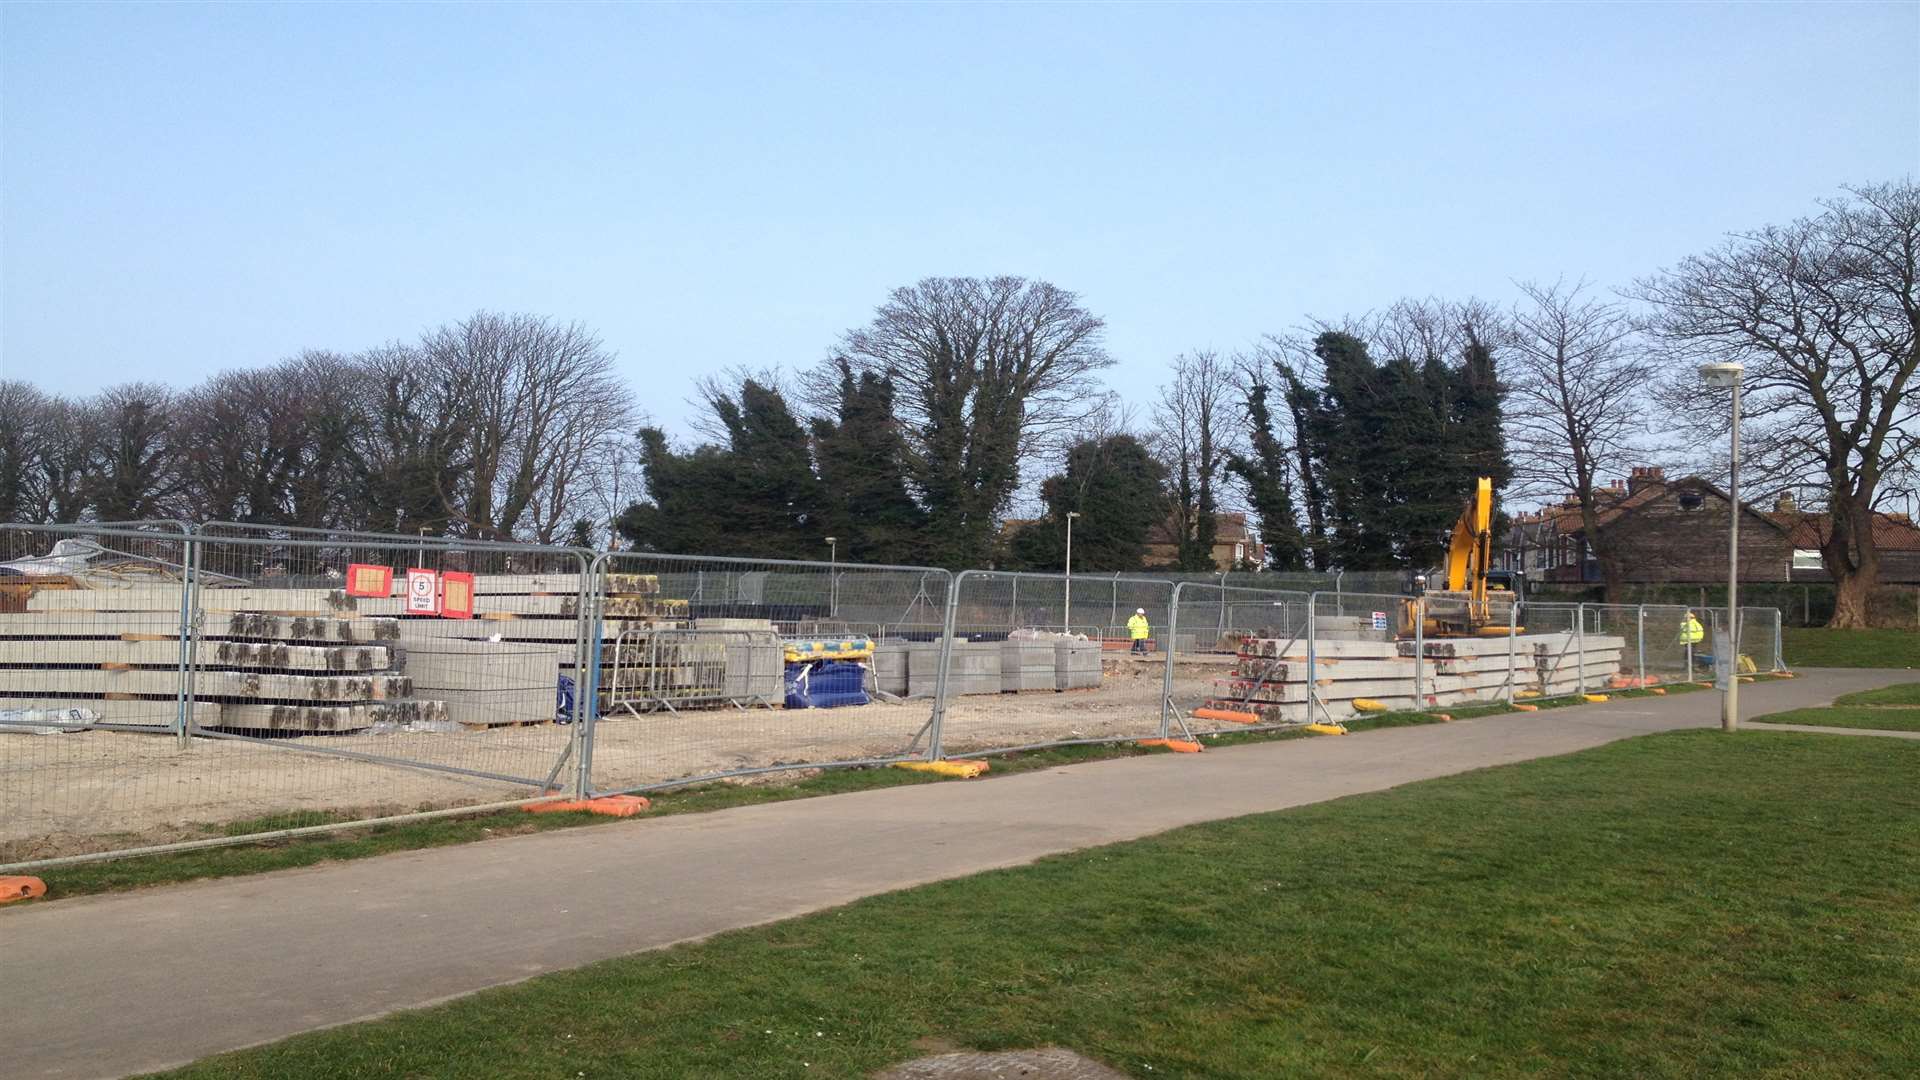 The area where the new Youth Club is being built, near Tides